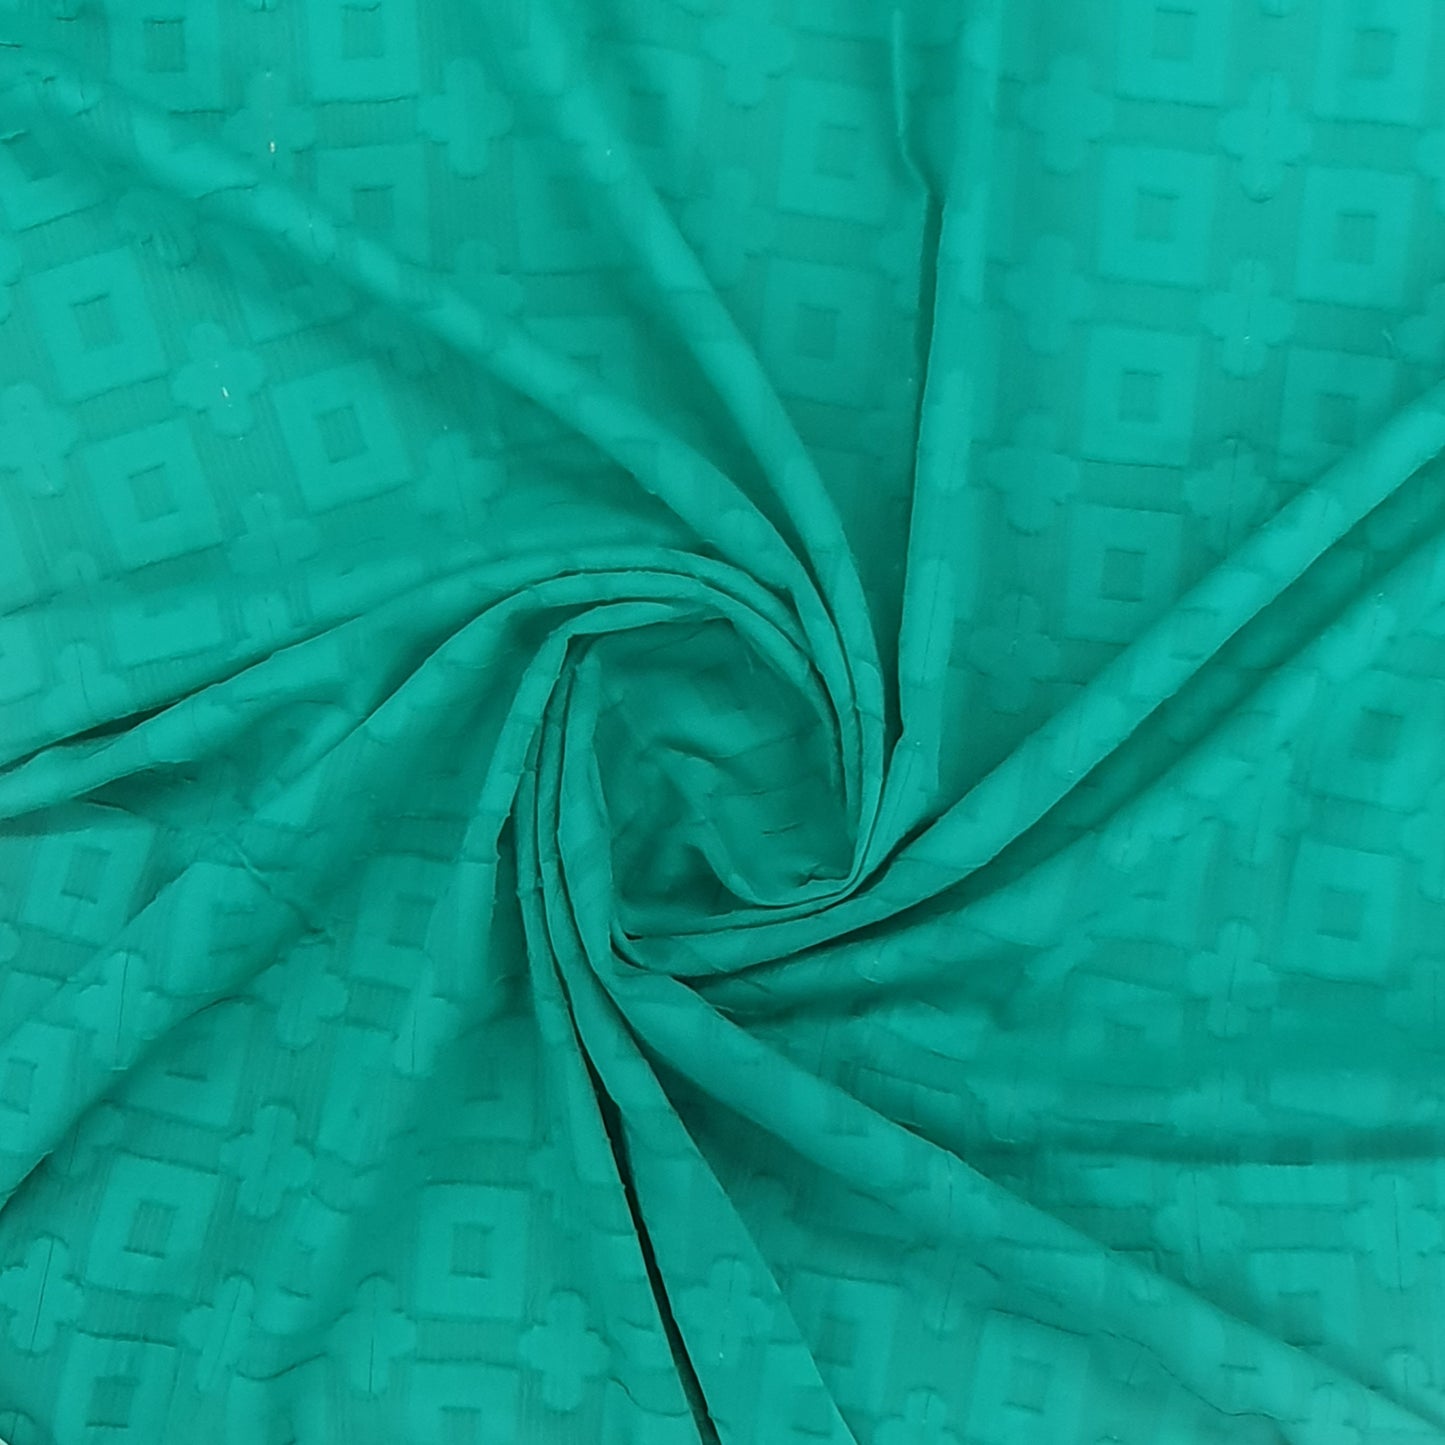 Green Geometrical Pattern With Golden Lurex Cotton Fabric Plain Weave 48 Inches